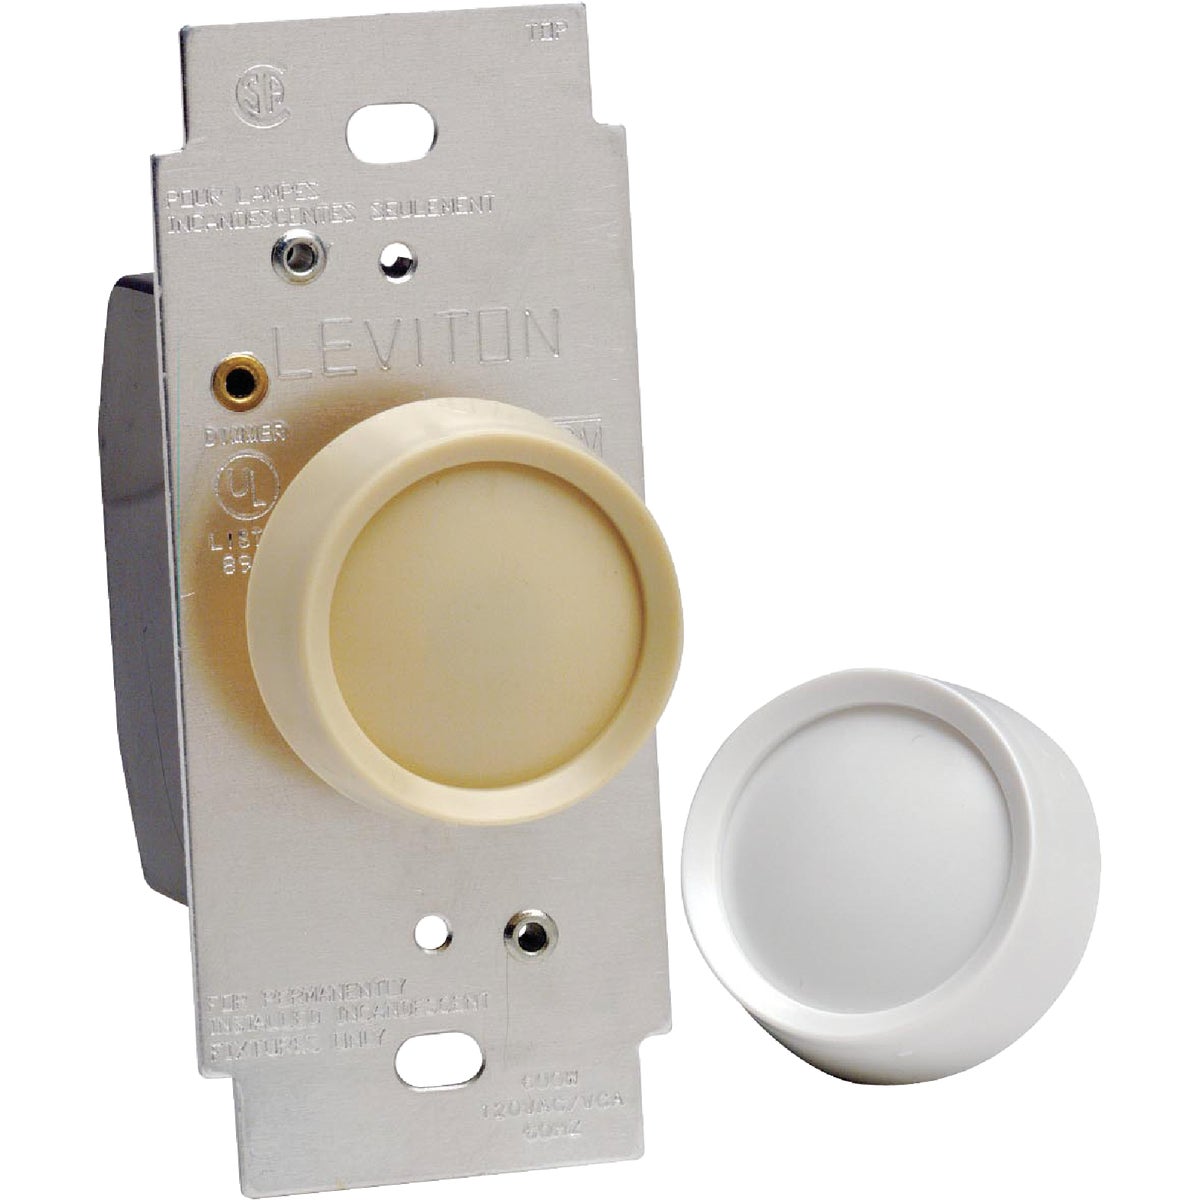 Item 502484, Universal push on-off single pole, 3-way rotary dimmer.